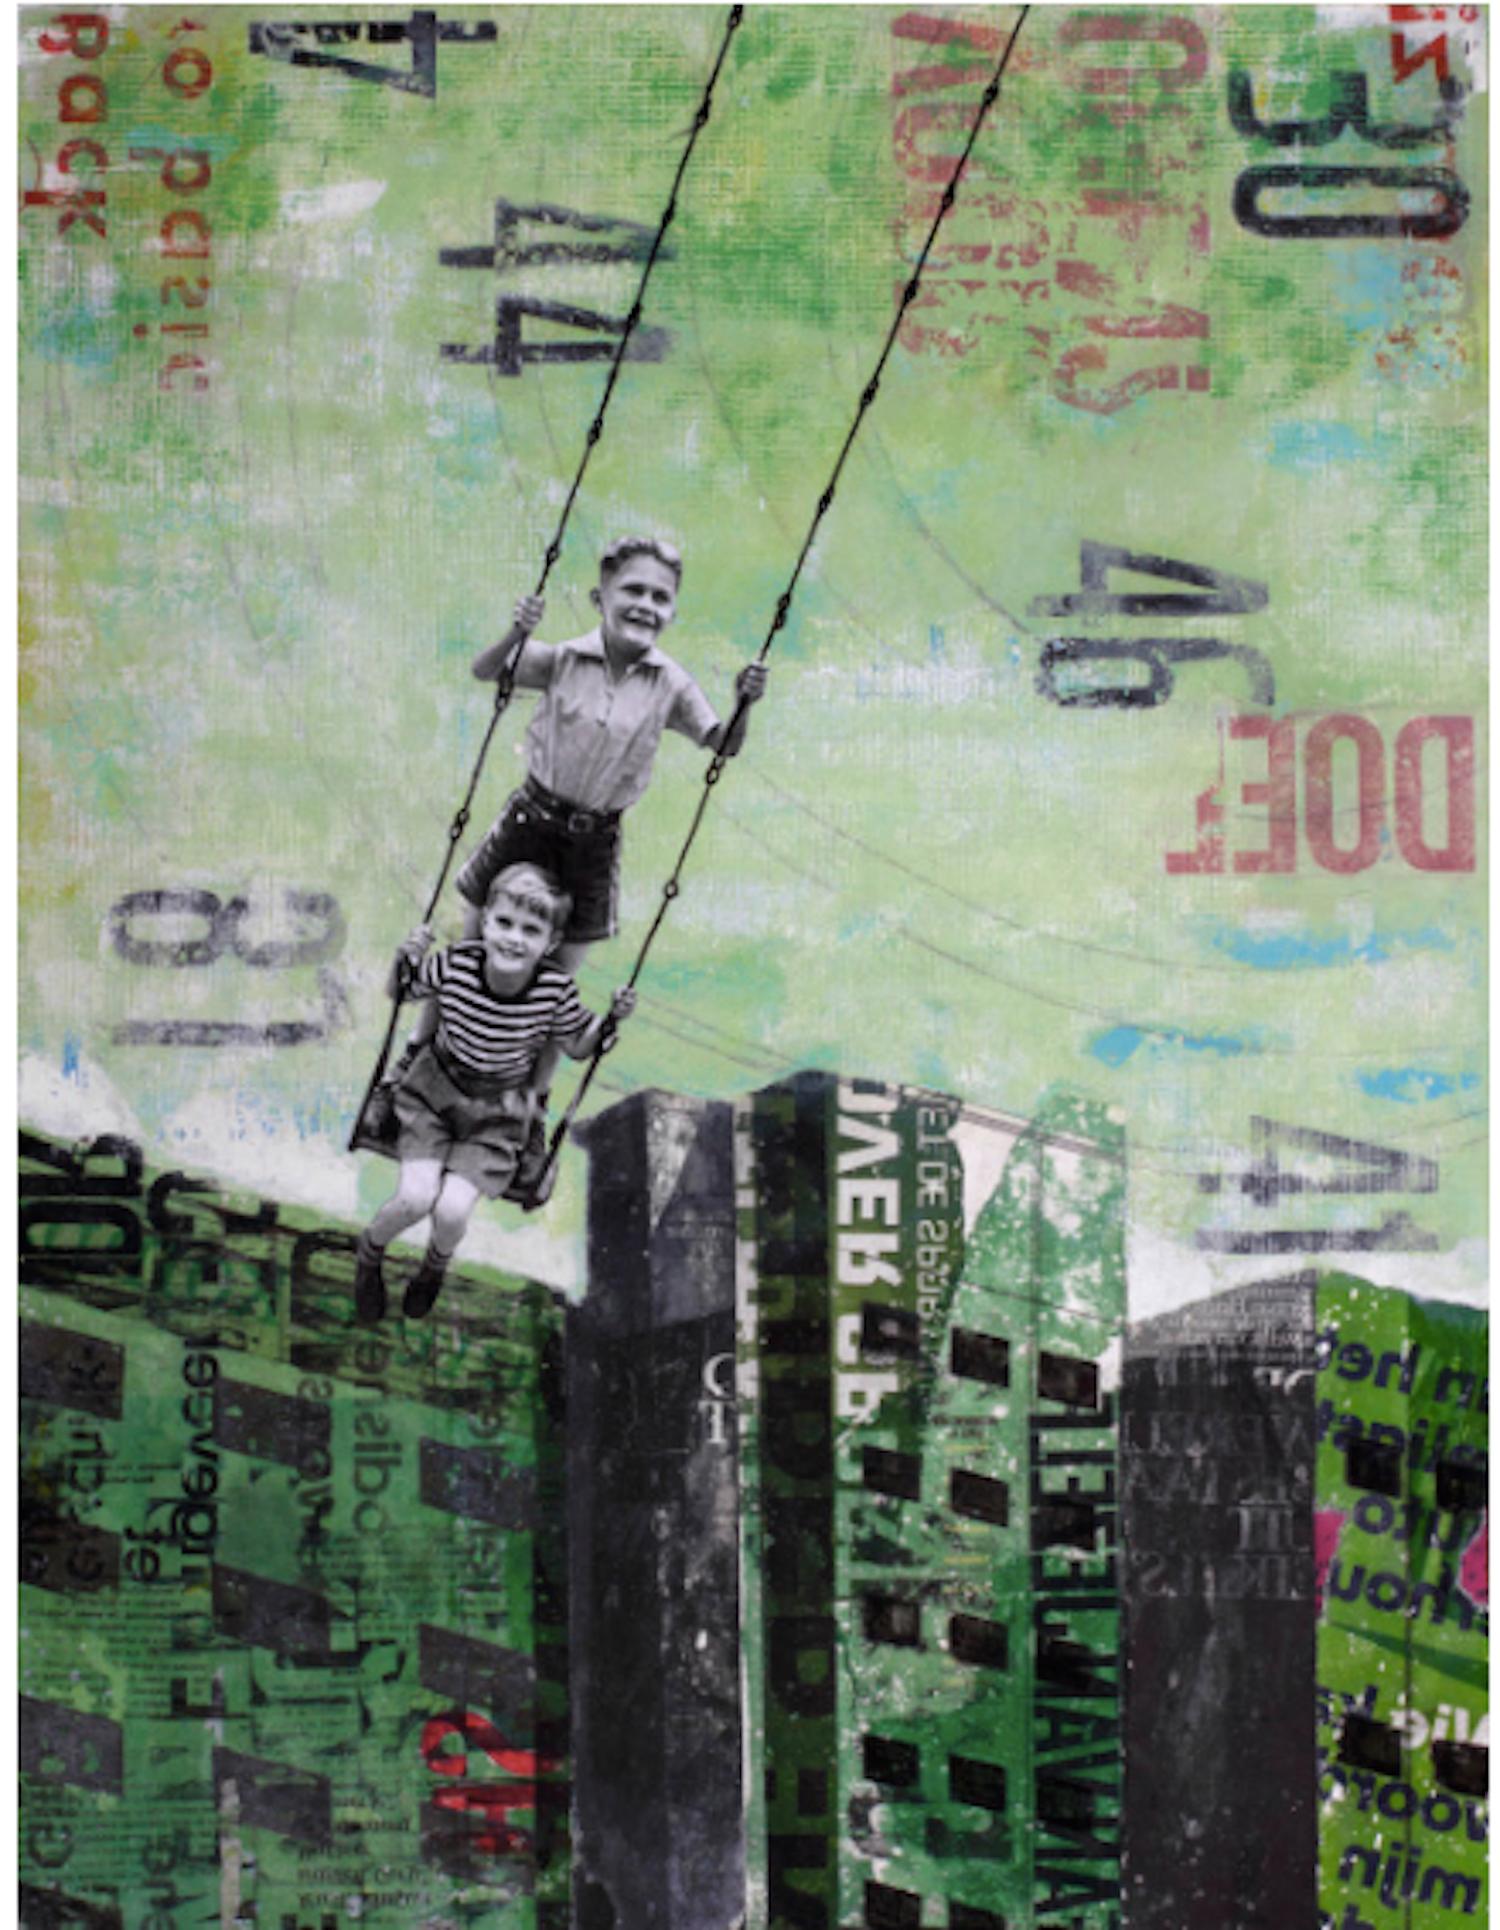 Deb Waterman Figurative Painting - Tuesday Swing - street art urban landscape grey and green painting on paper